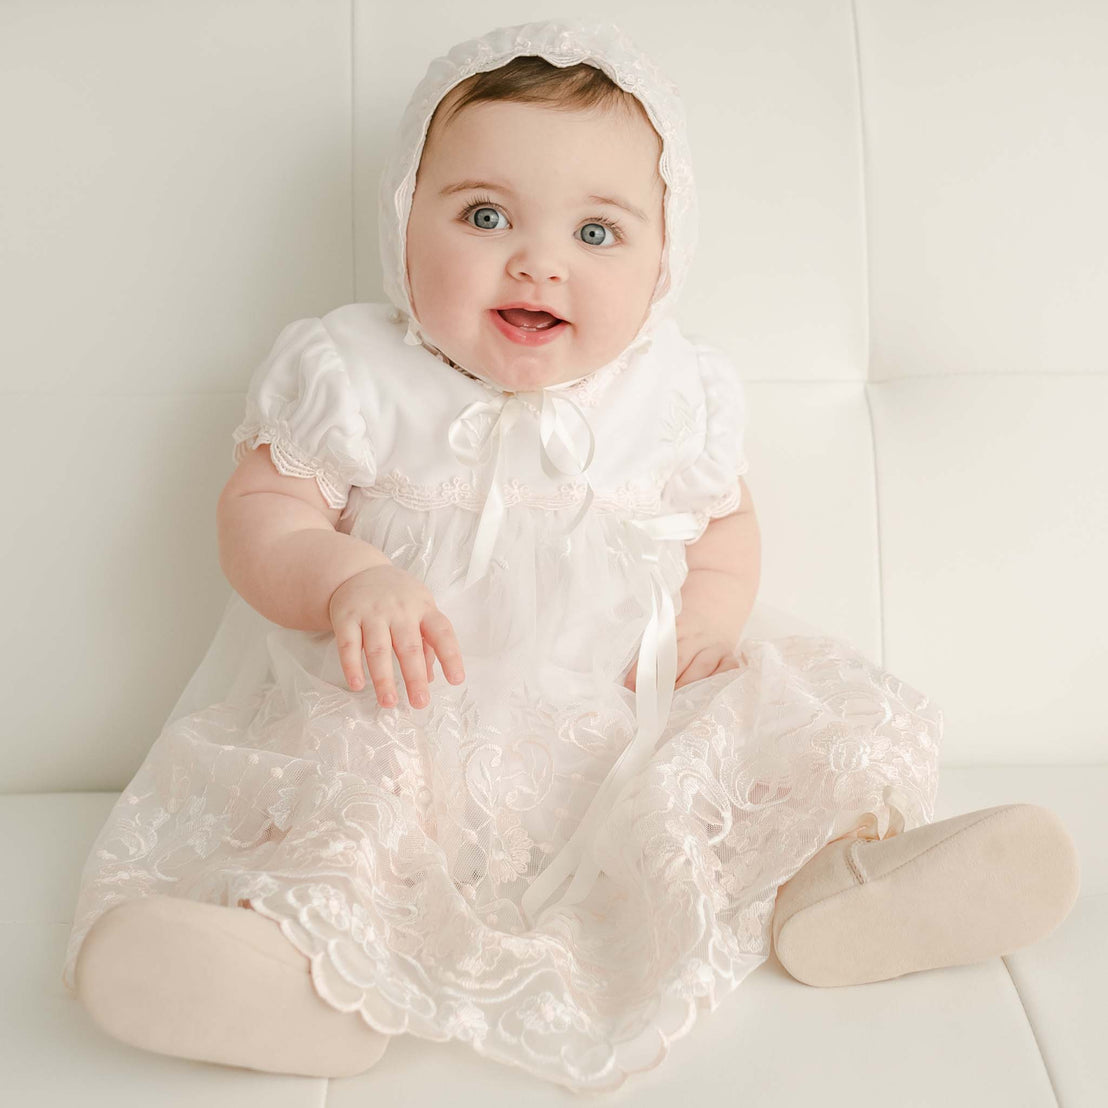 A joyful baby wearing a vintage-inspired white lace baptism gown and Joli Fitted Bonnet, sitting on a white sofa, looks up with bright blue eyes and an open-mouthed smile.